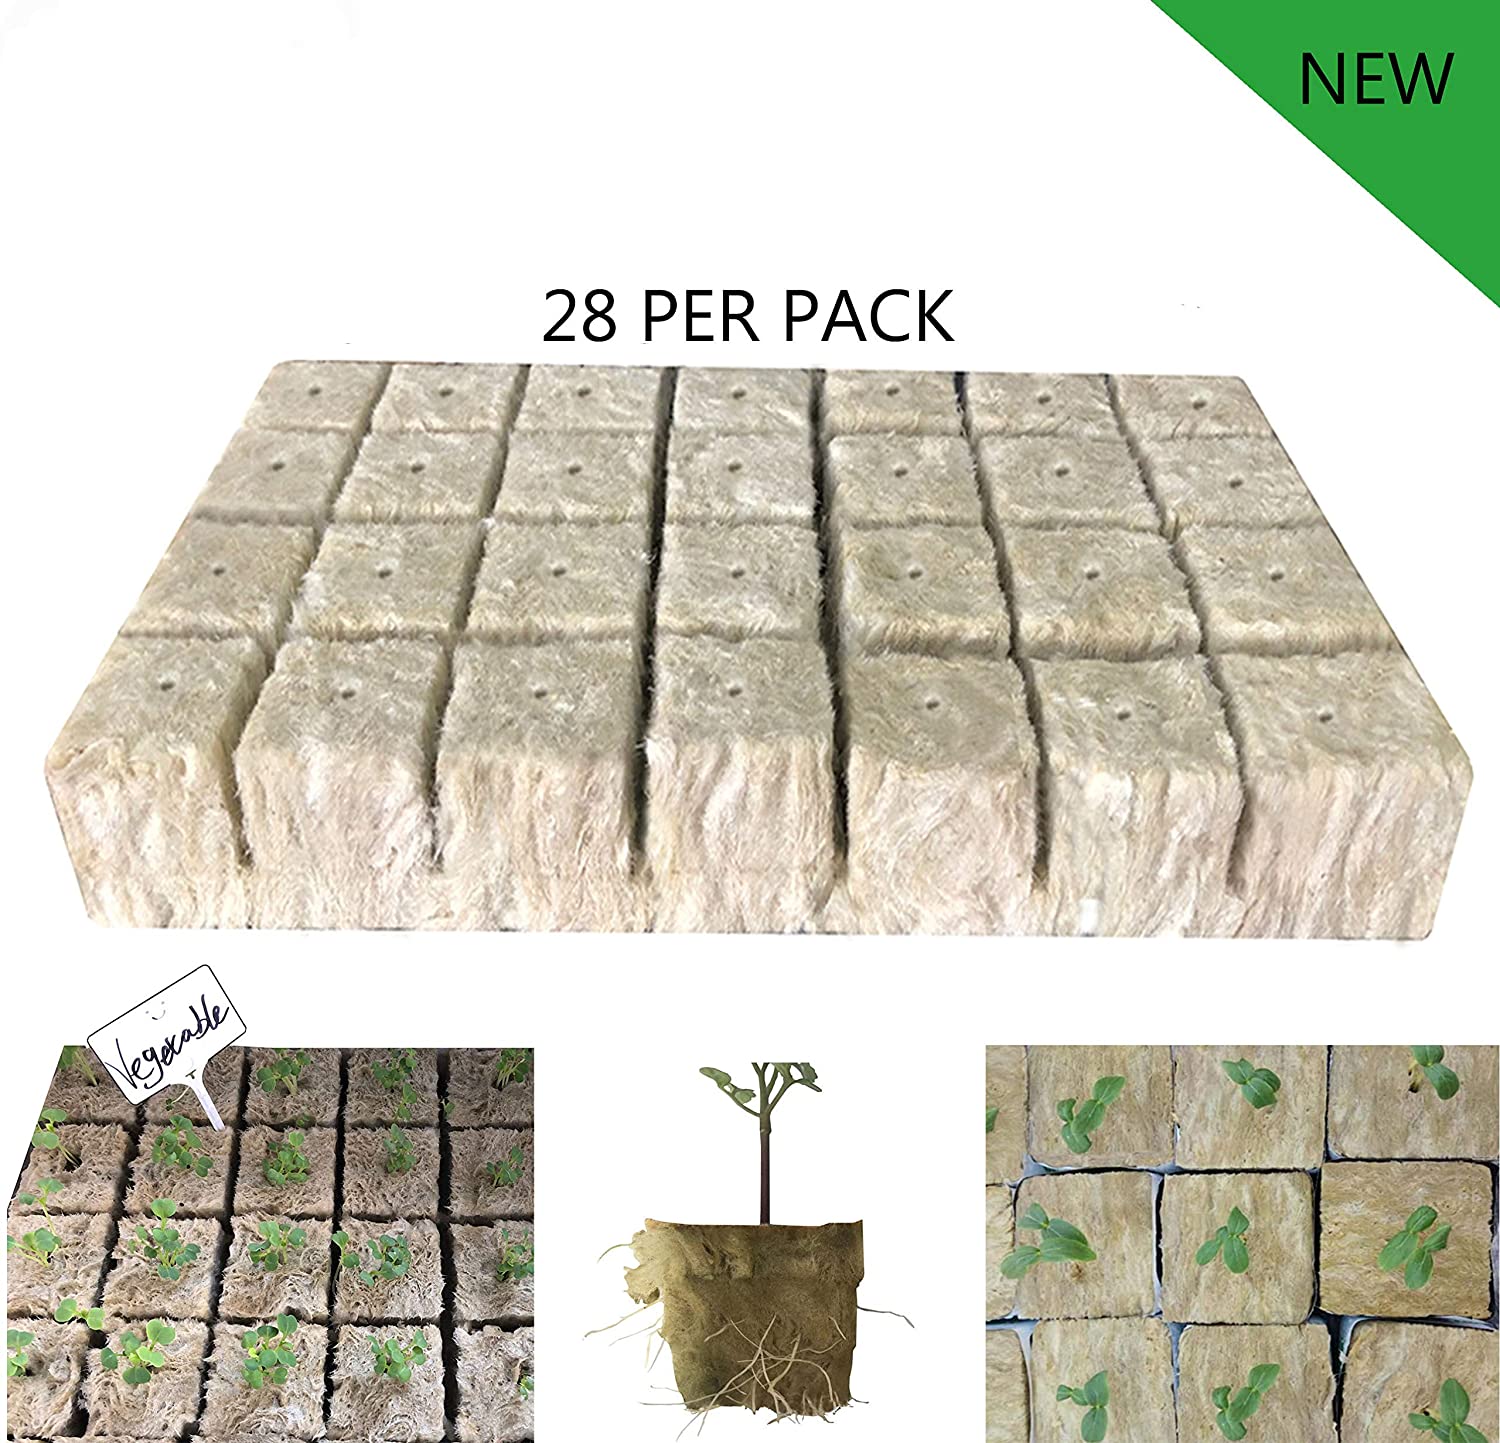 28 Per Pack Rockwool/Stonewool Grow Cubes Starter Sheets for Cuttings Cloning 